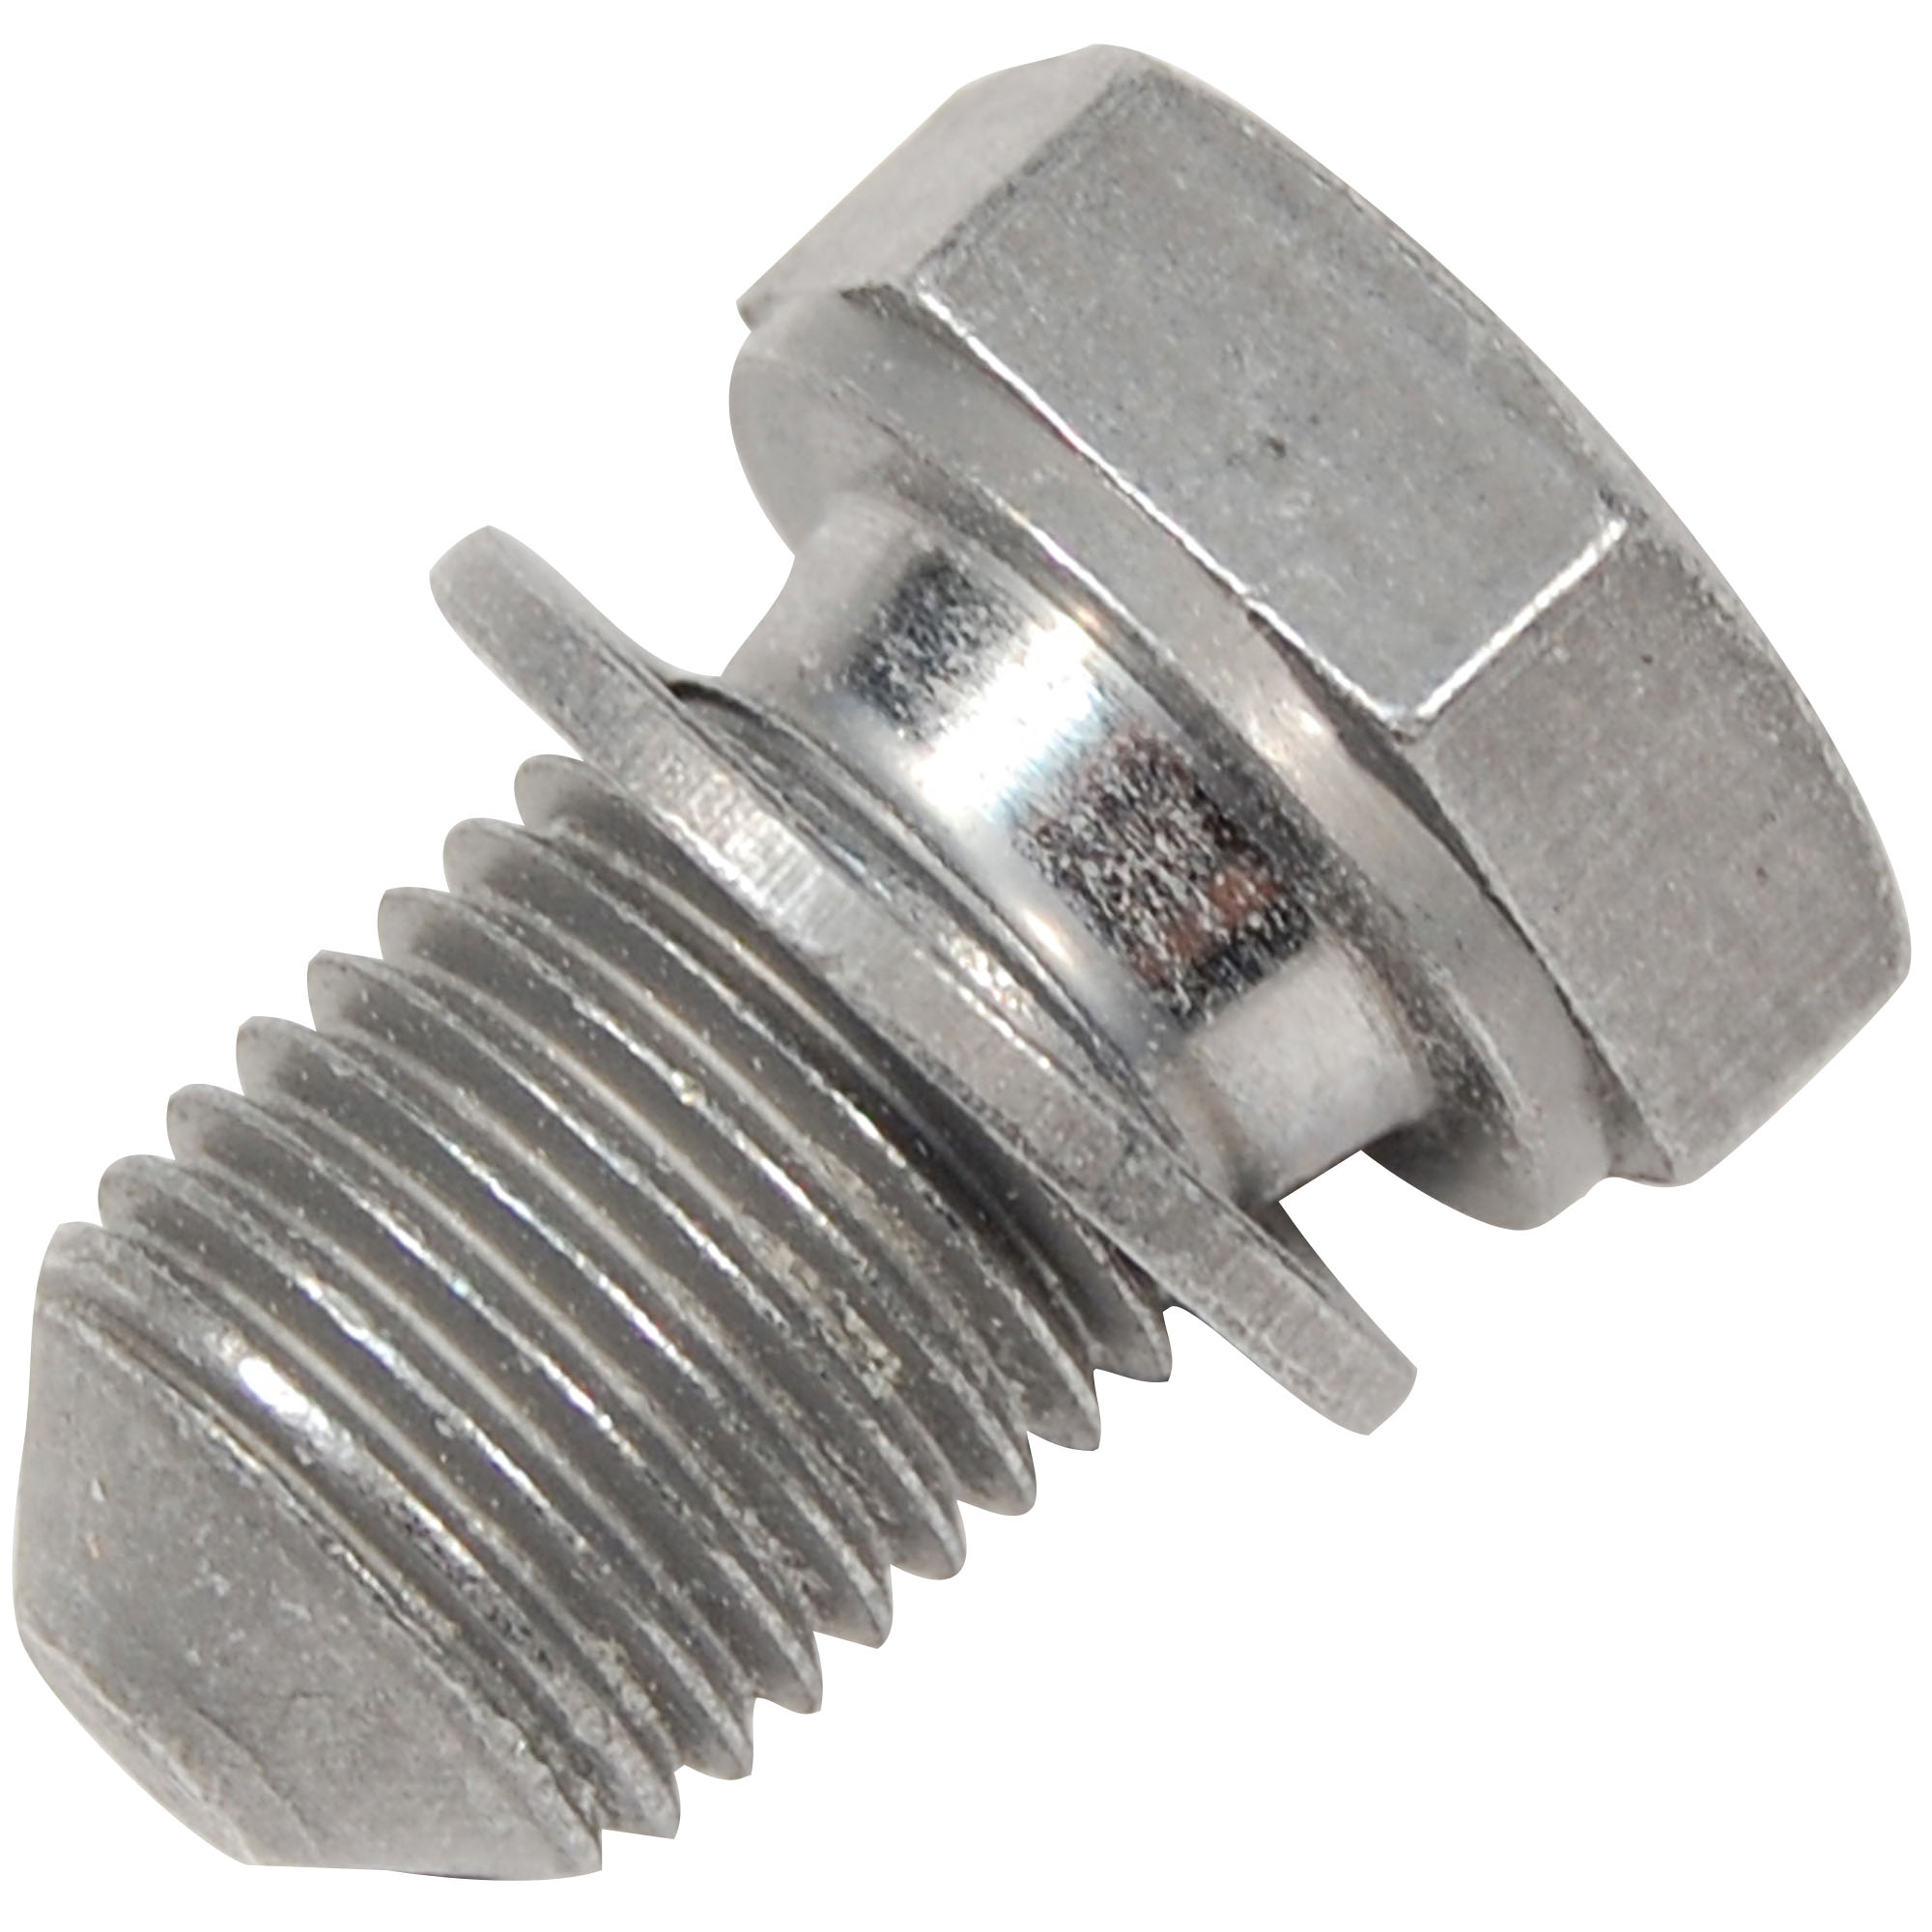 Oil drain plug for OE number N90813202 in detailed view